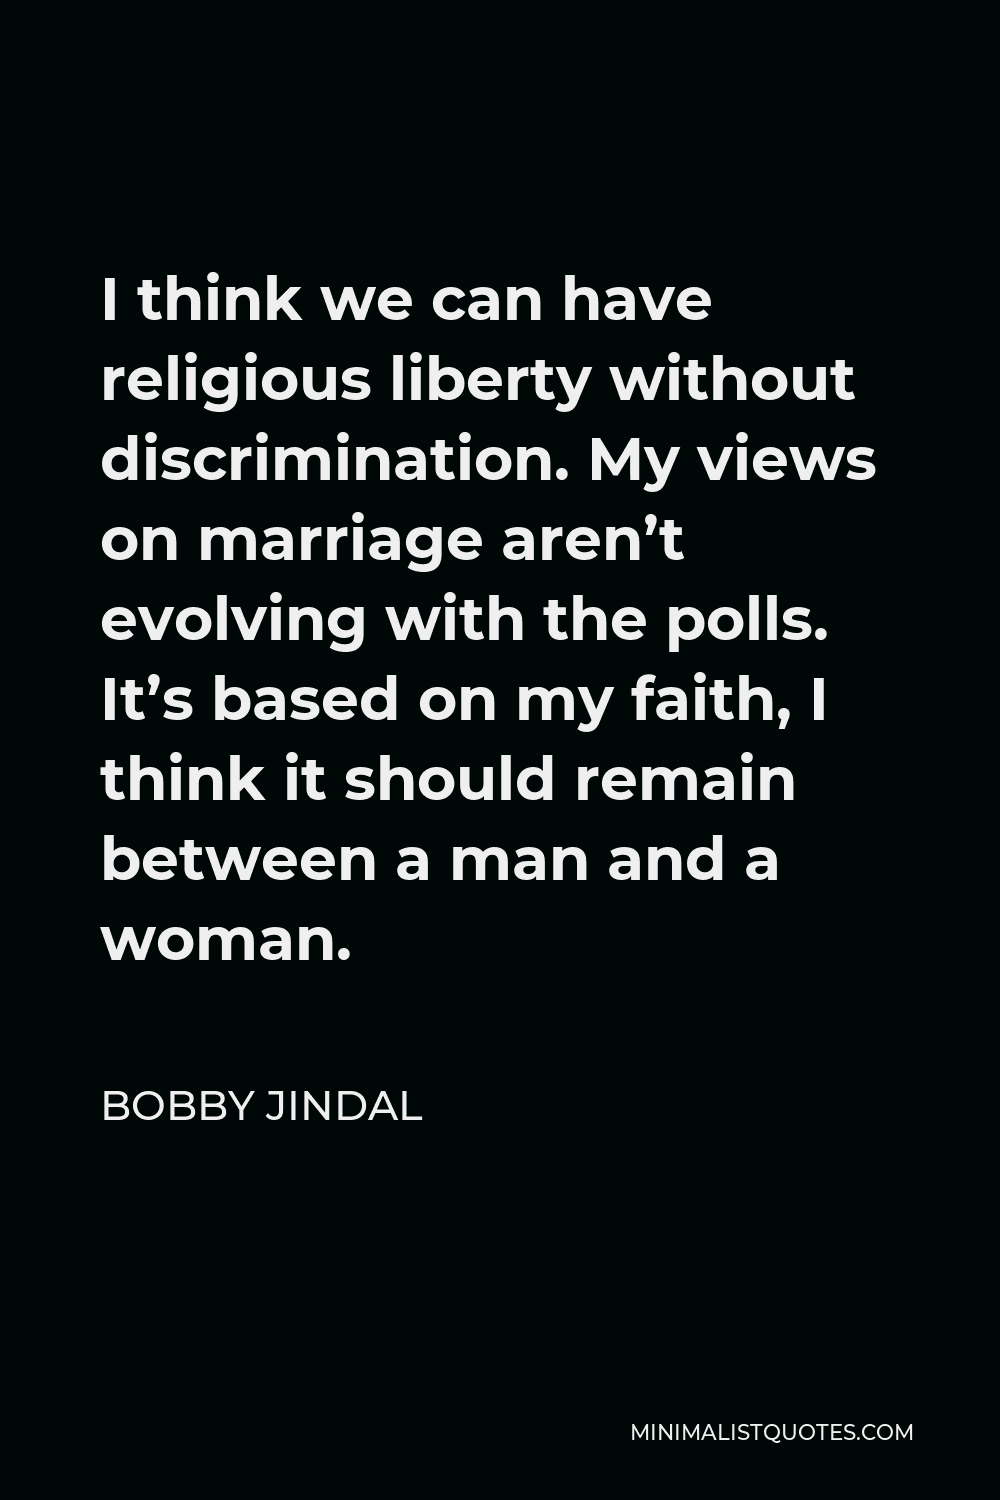 Bobby Jindal Quote - I think we can have religious liberty without discrimination. My views on marriage aren’t evolving with the polls. It’s based on my faith, I think it should remain between a man and a woman.